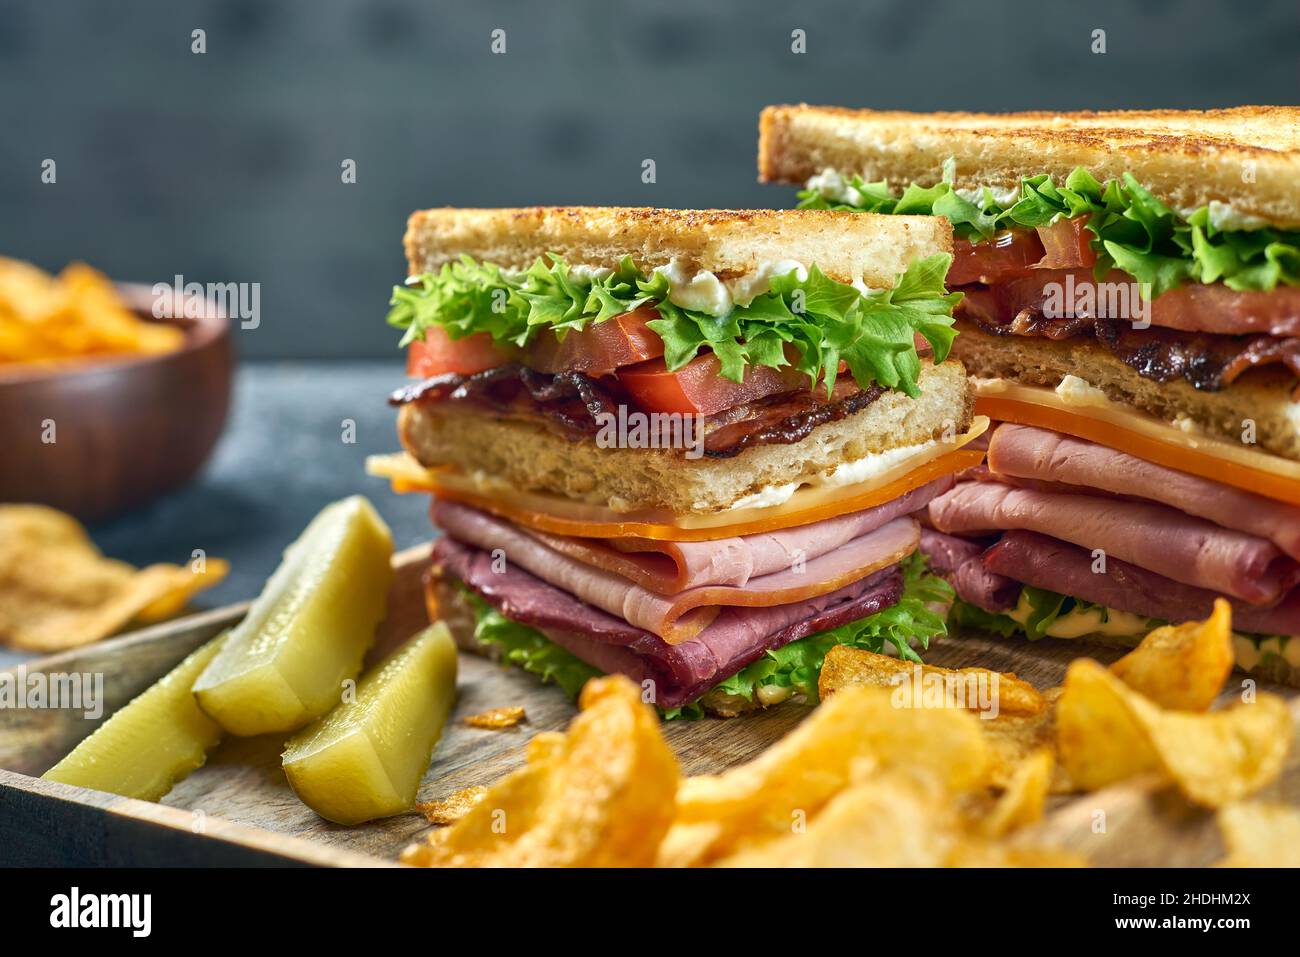 Pieces of club sandwich with potato chips on wooden tray Stock Photo